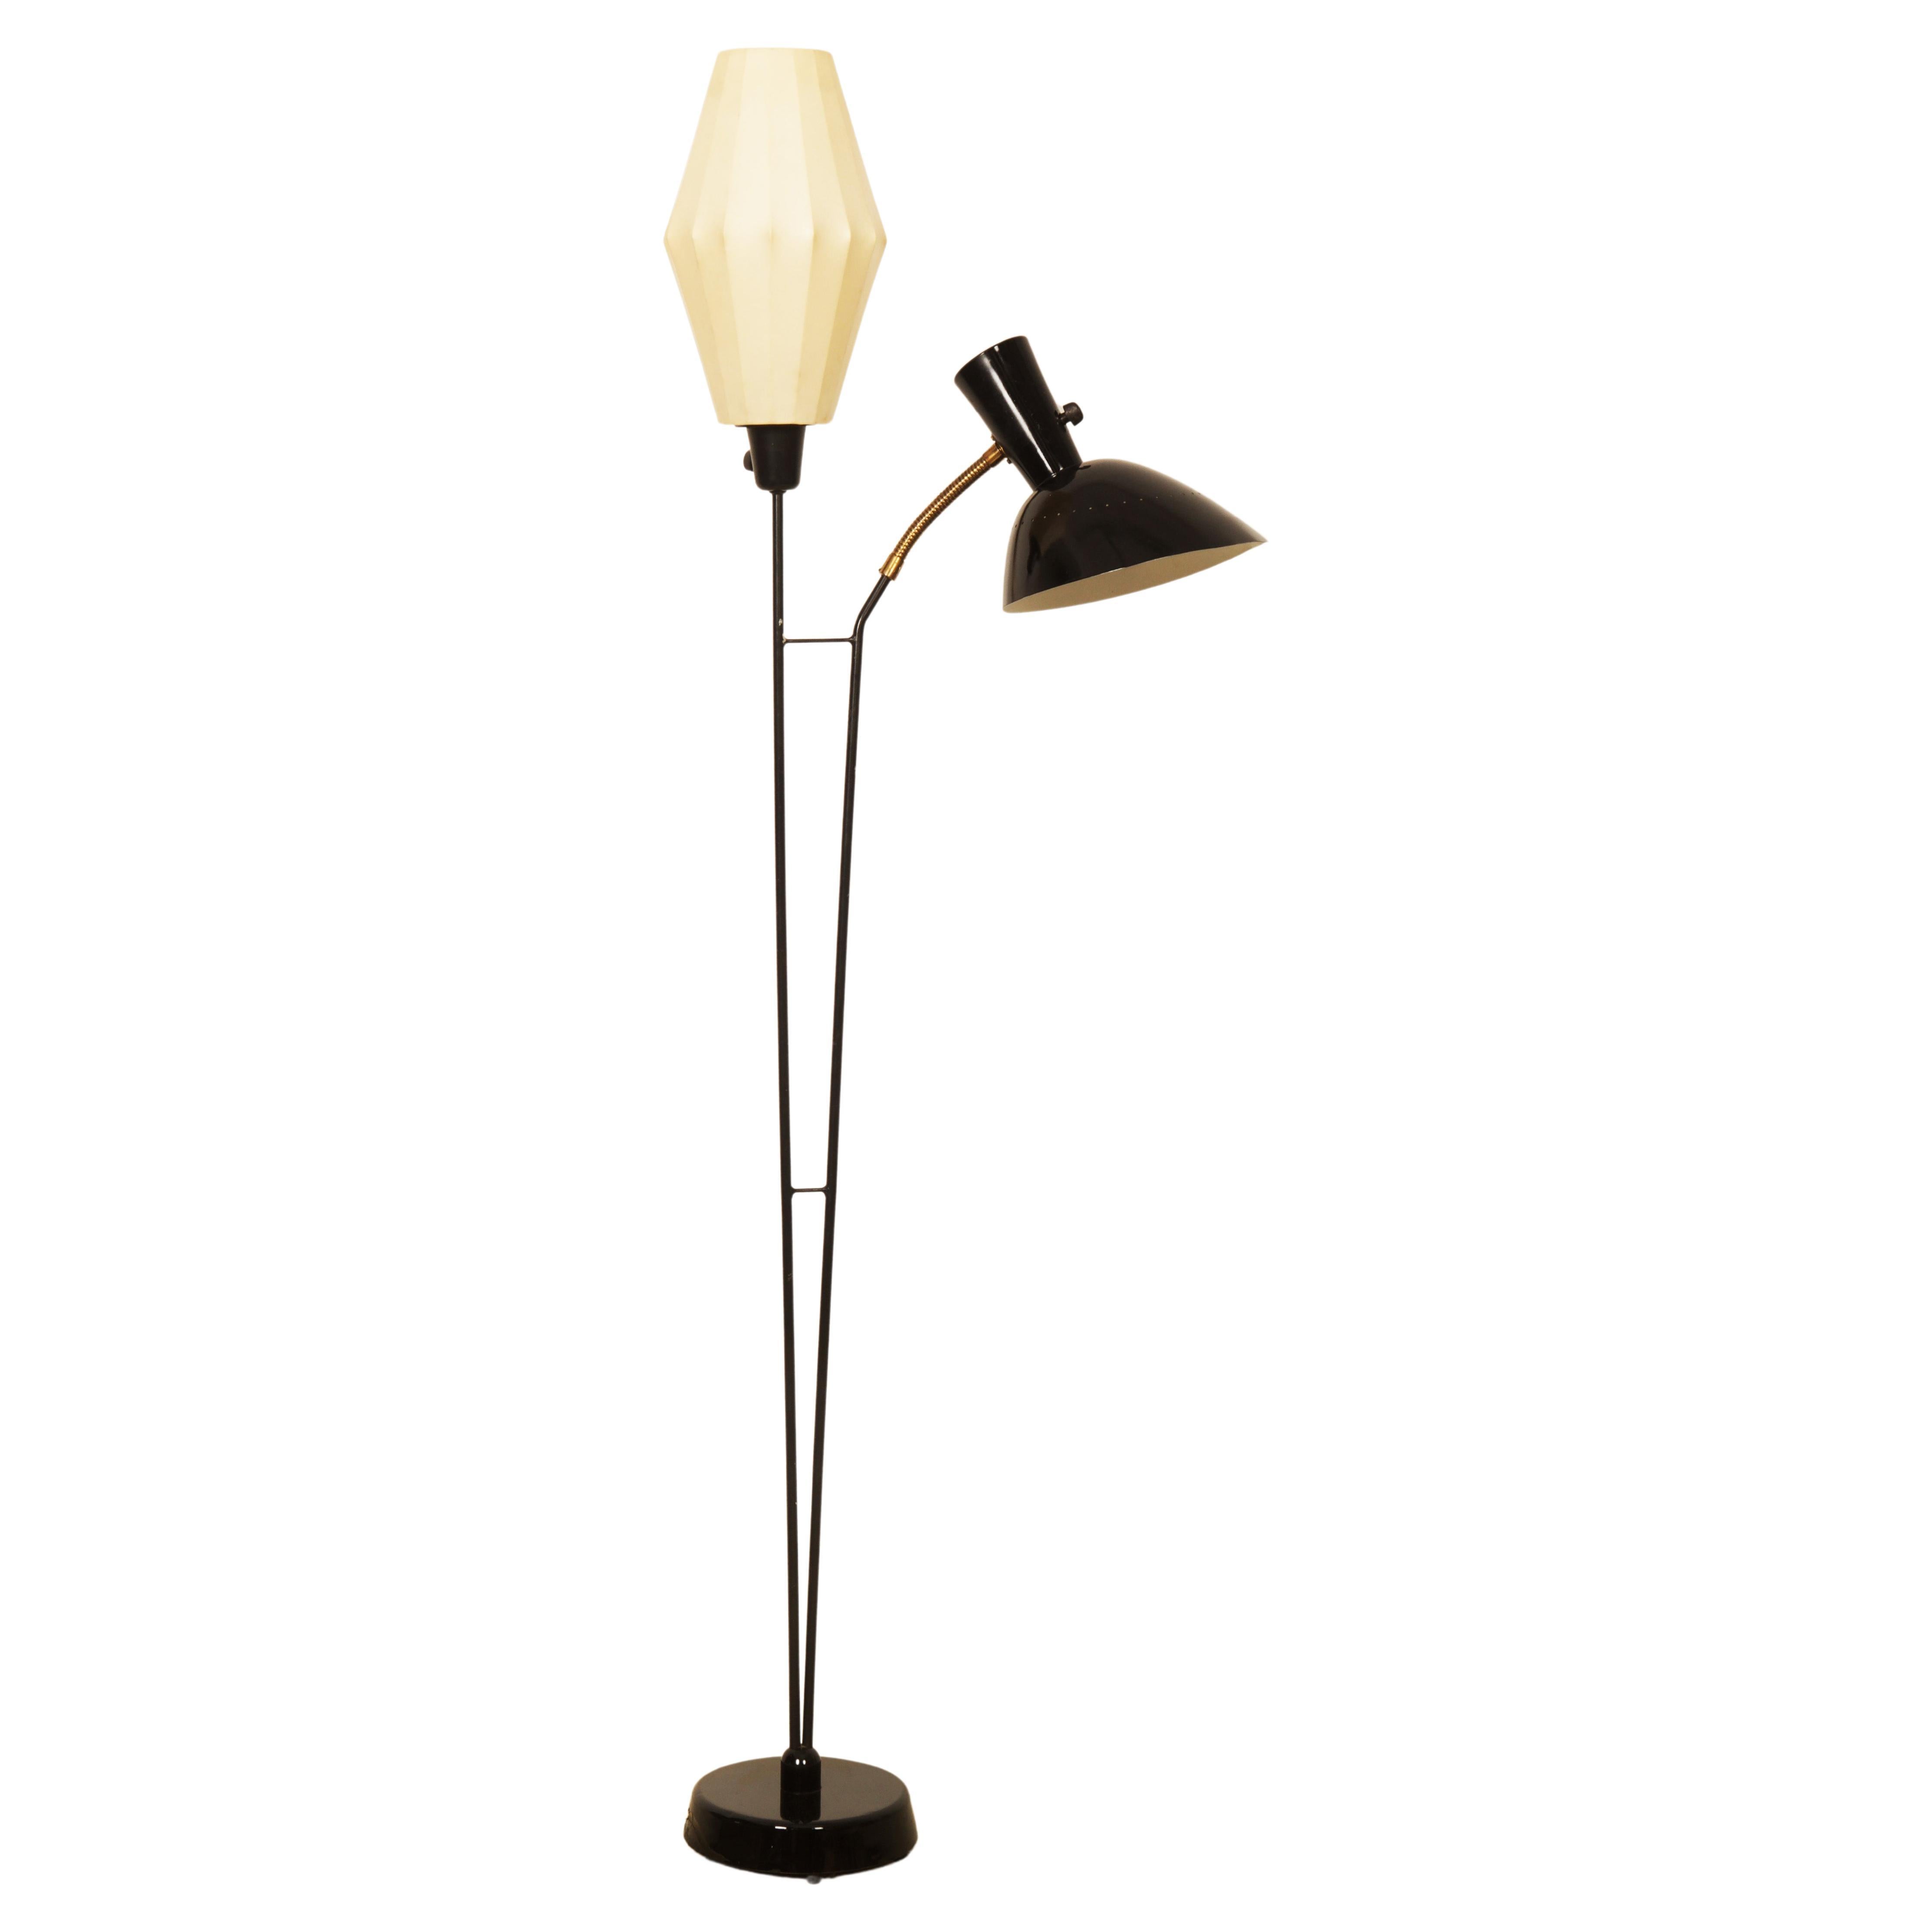 Rare Floor Lamp by Hans Bergström for Ateljé Lyktan from the 1950s For Sale